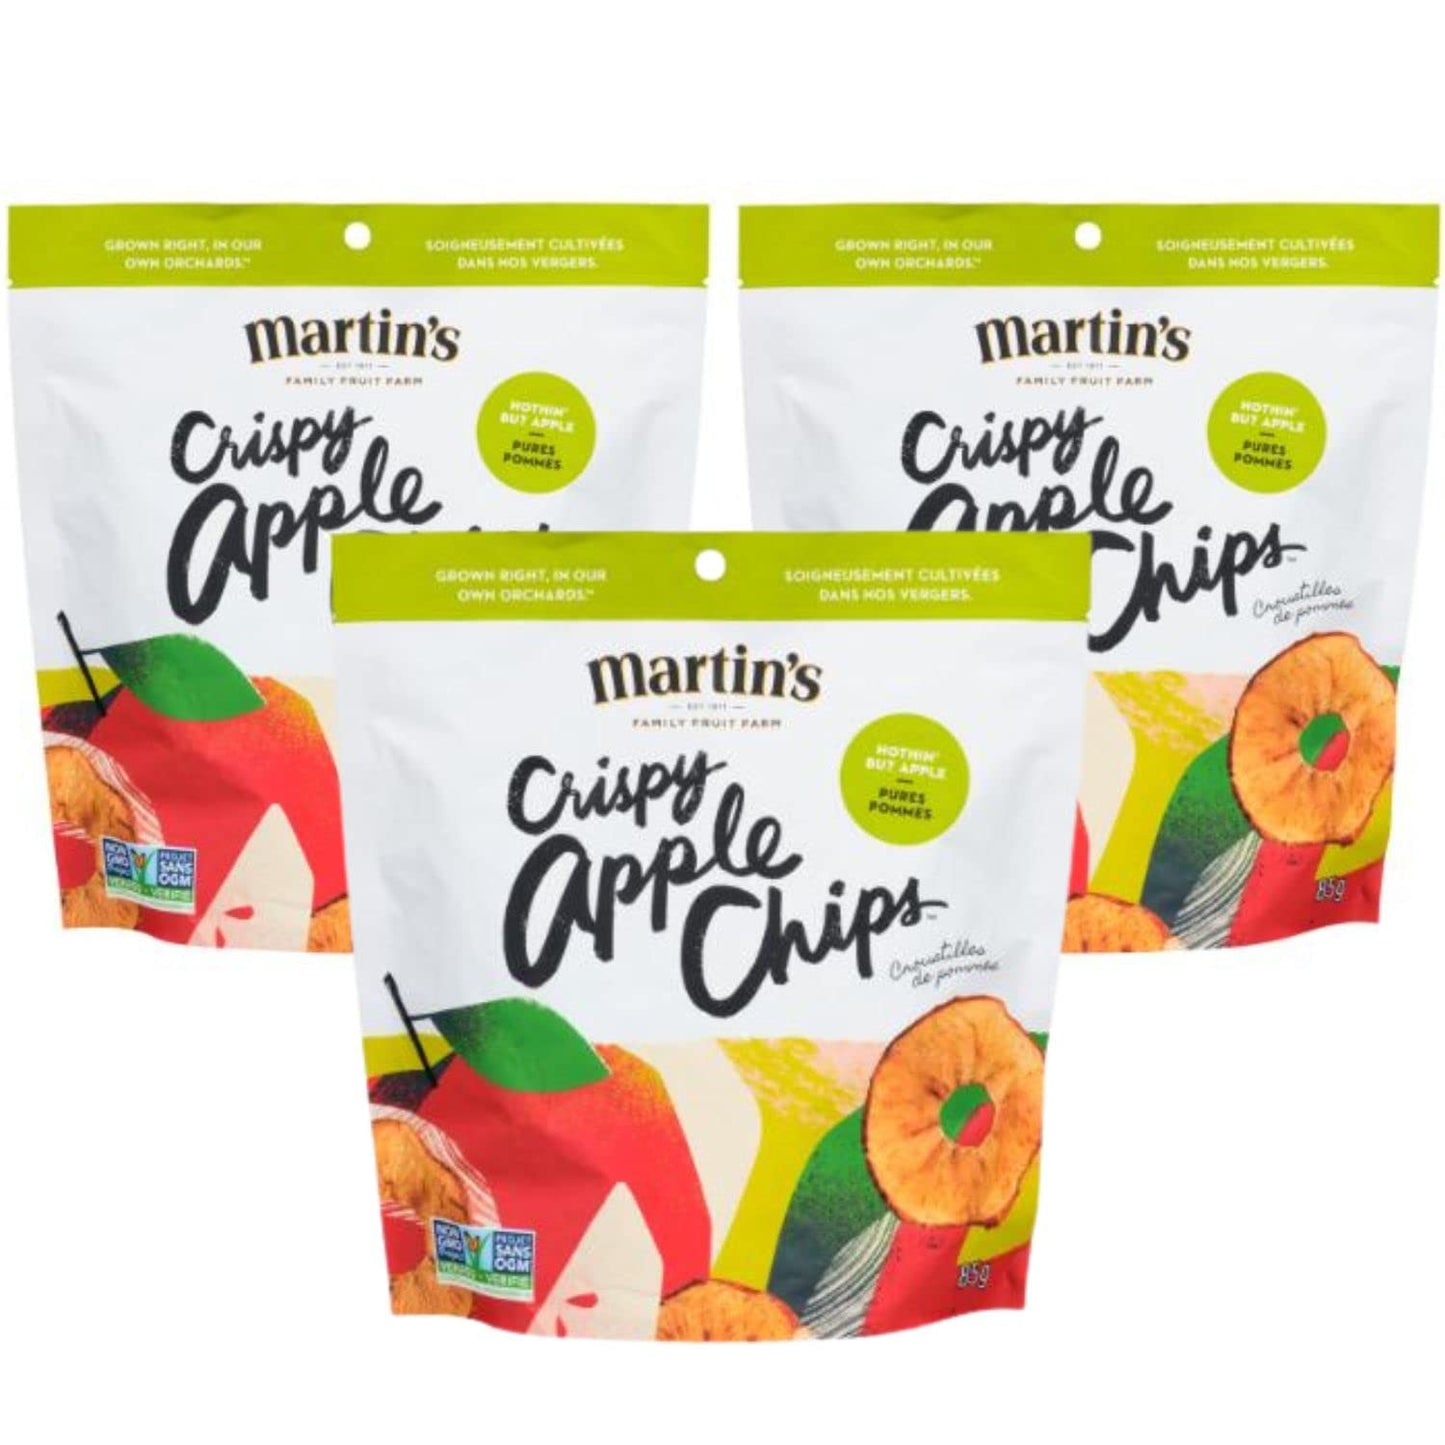 Martin's Nothin' But Apple Crispy Apple Chips, 85g/3oz (Shipped from Canada)